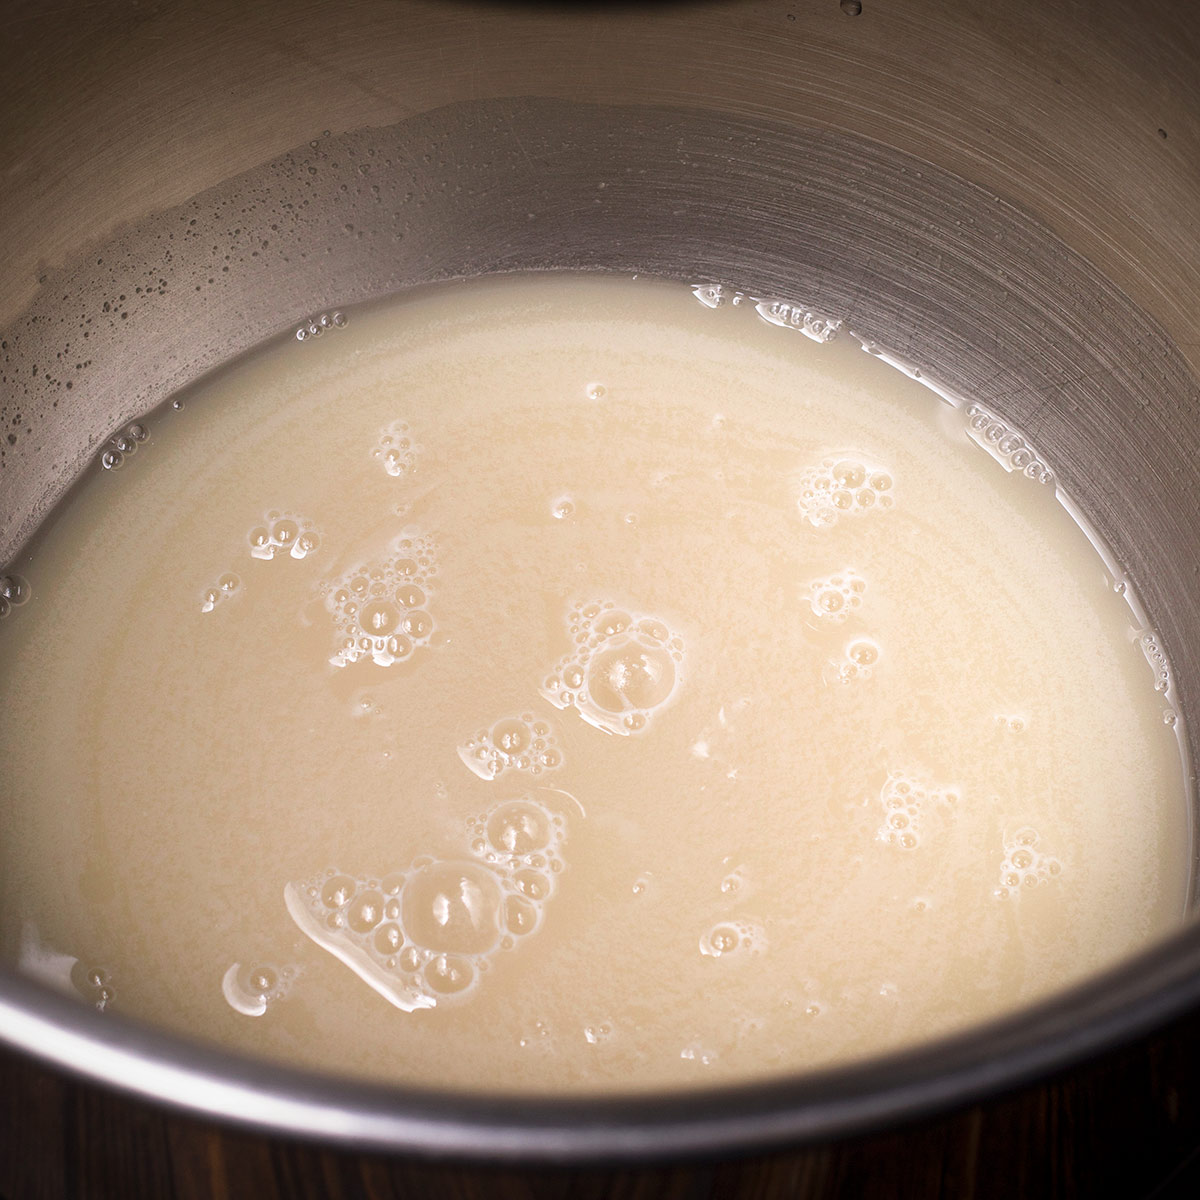 Yeast in a bowl of warm water that's just started to bubble and make the water creamy.